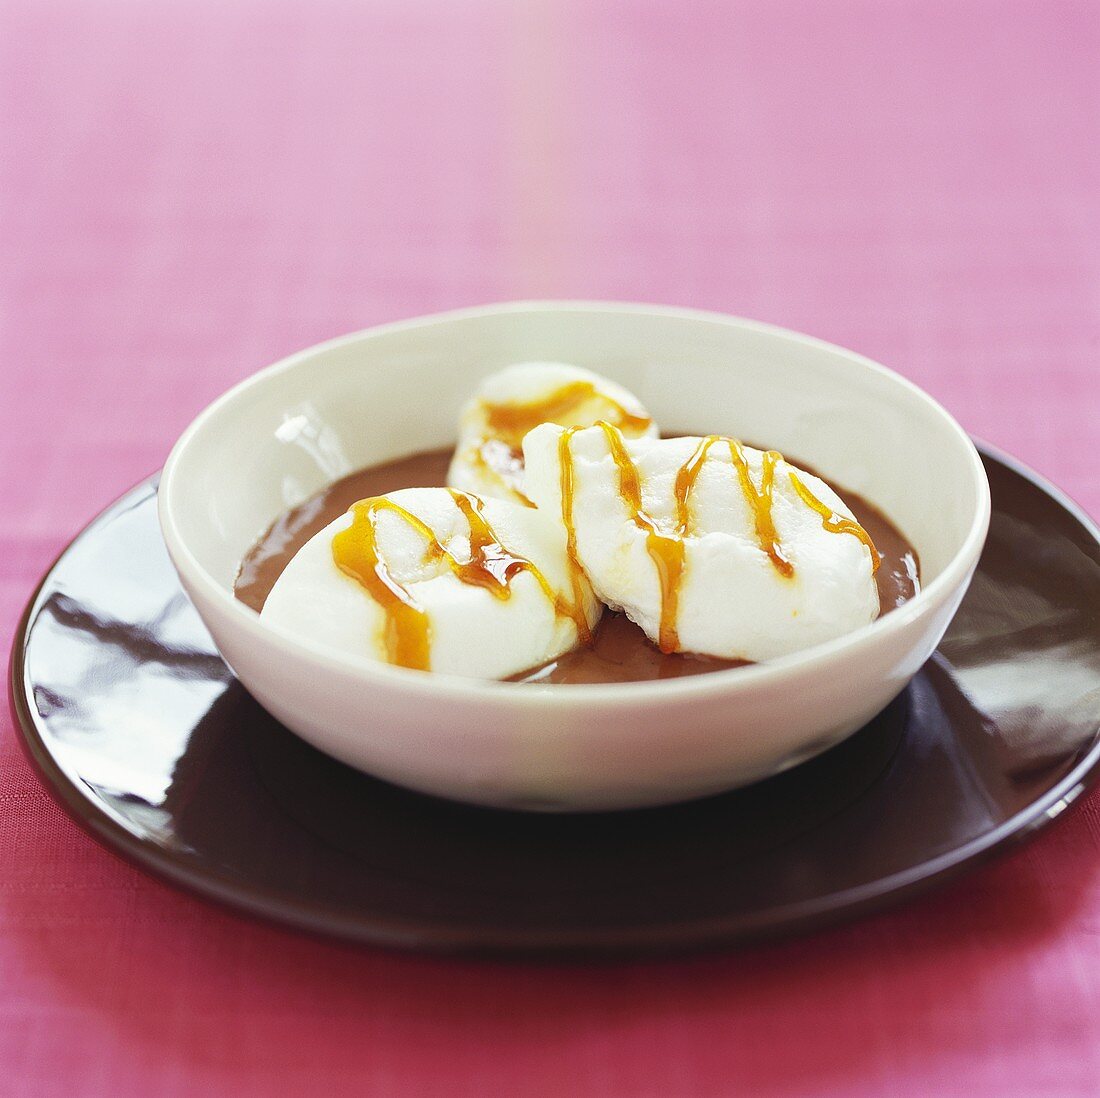 Poached meringues with caramel sauce on chocolate pudding